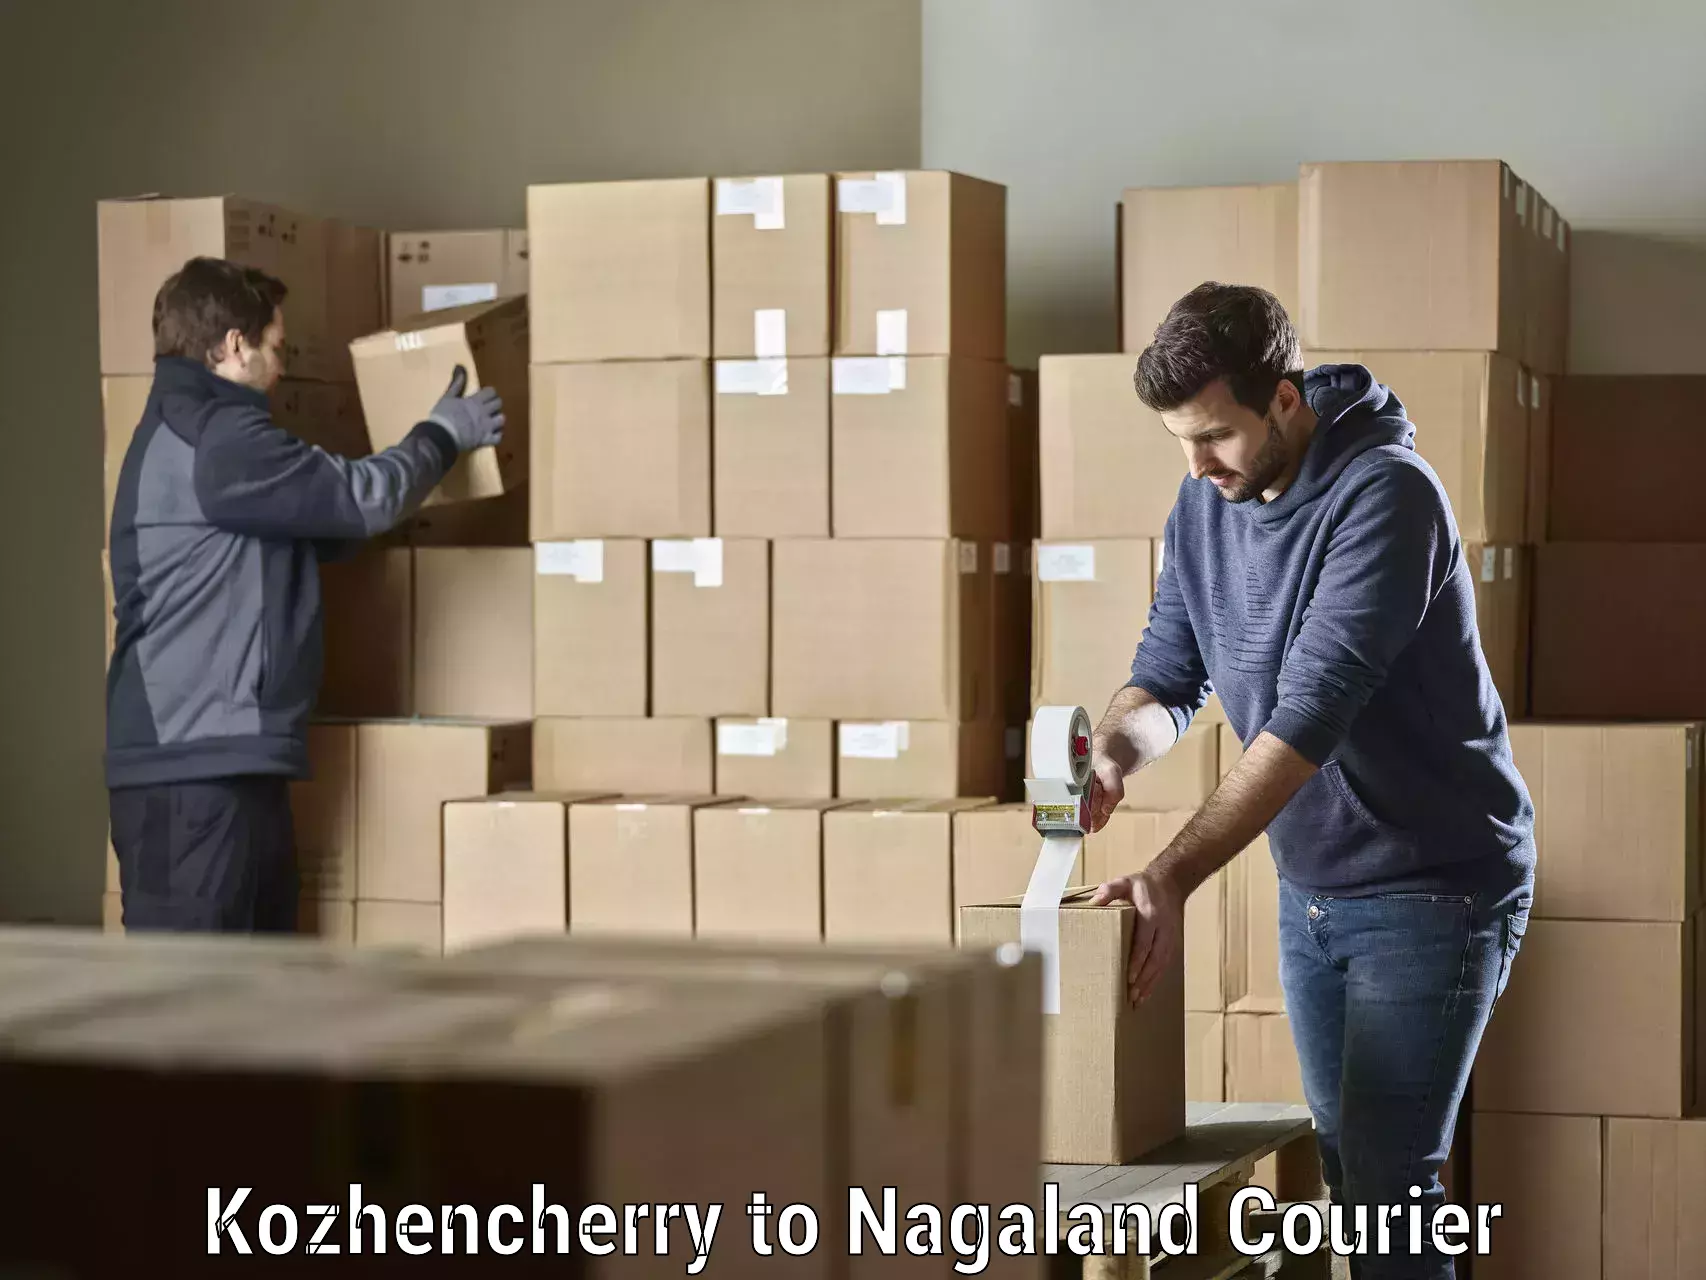 Reliable delivery network Kozhencherry to Nagaland